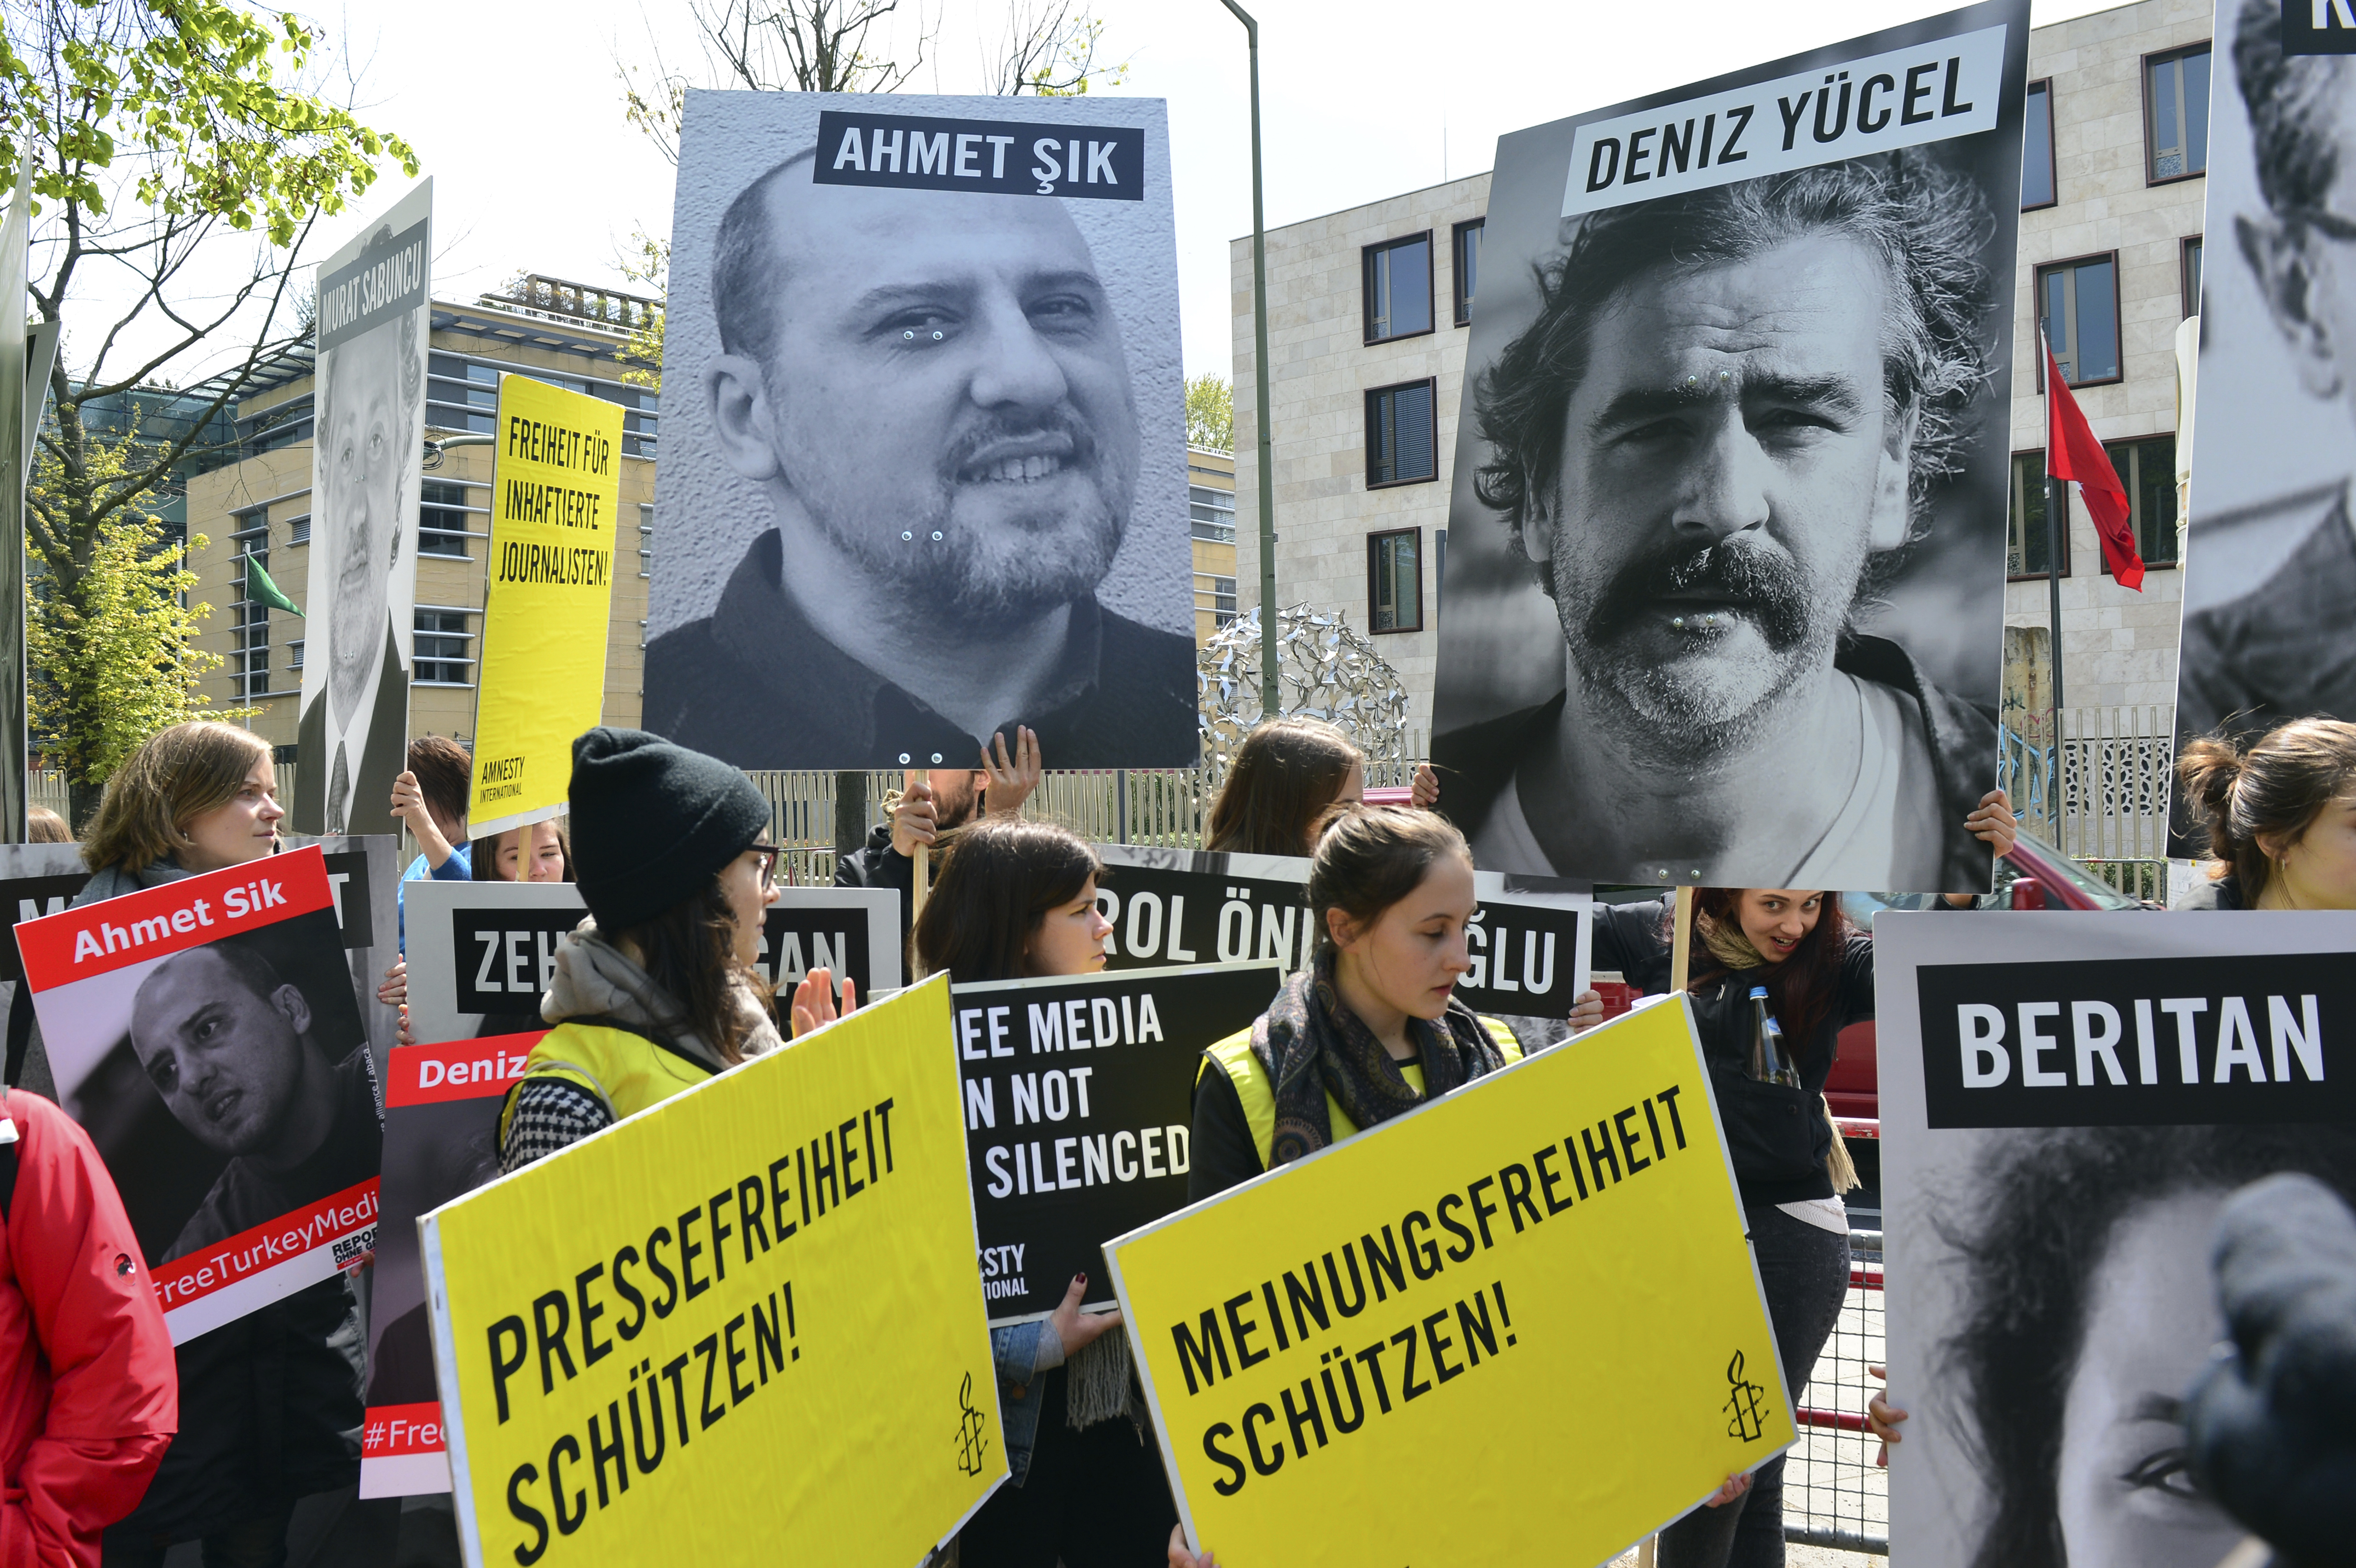 Demonstrators protest in front of the Turkish embassy in Berlin, Germany, 3 May 2017. The demonstration was organized by Amnesty International and Reporters Without Borders in protest against the large number of reporters and journalists currently in prison in Turkey. Photo by: Maurizio Gambarini/picture-alliance/dpa/AP Images